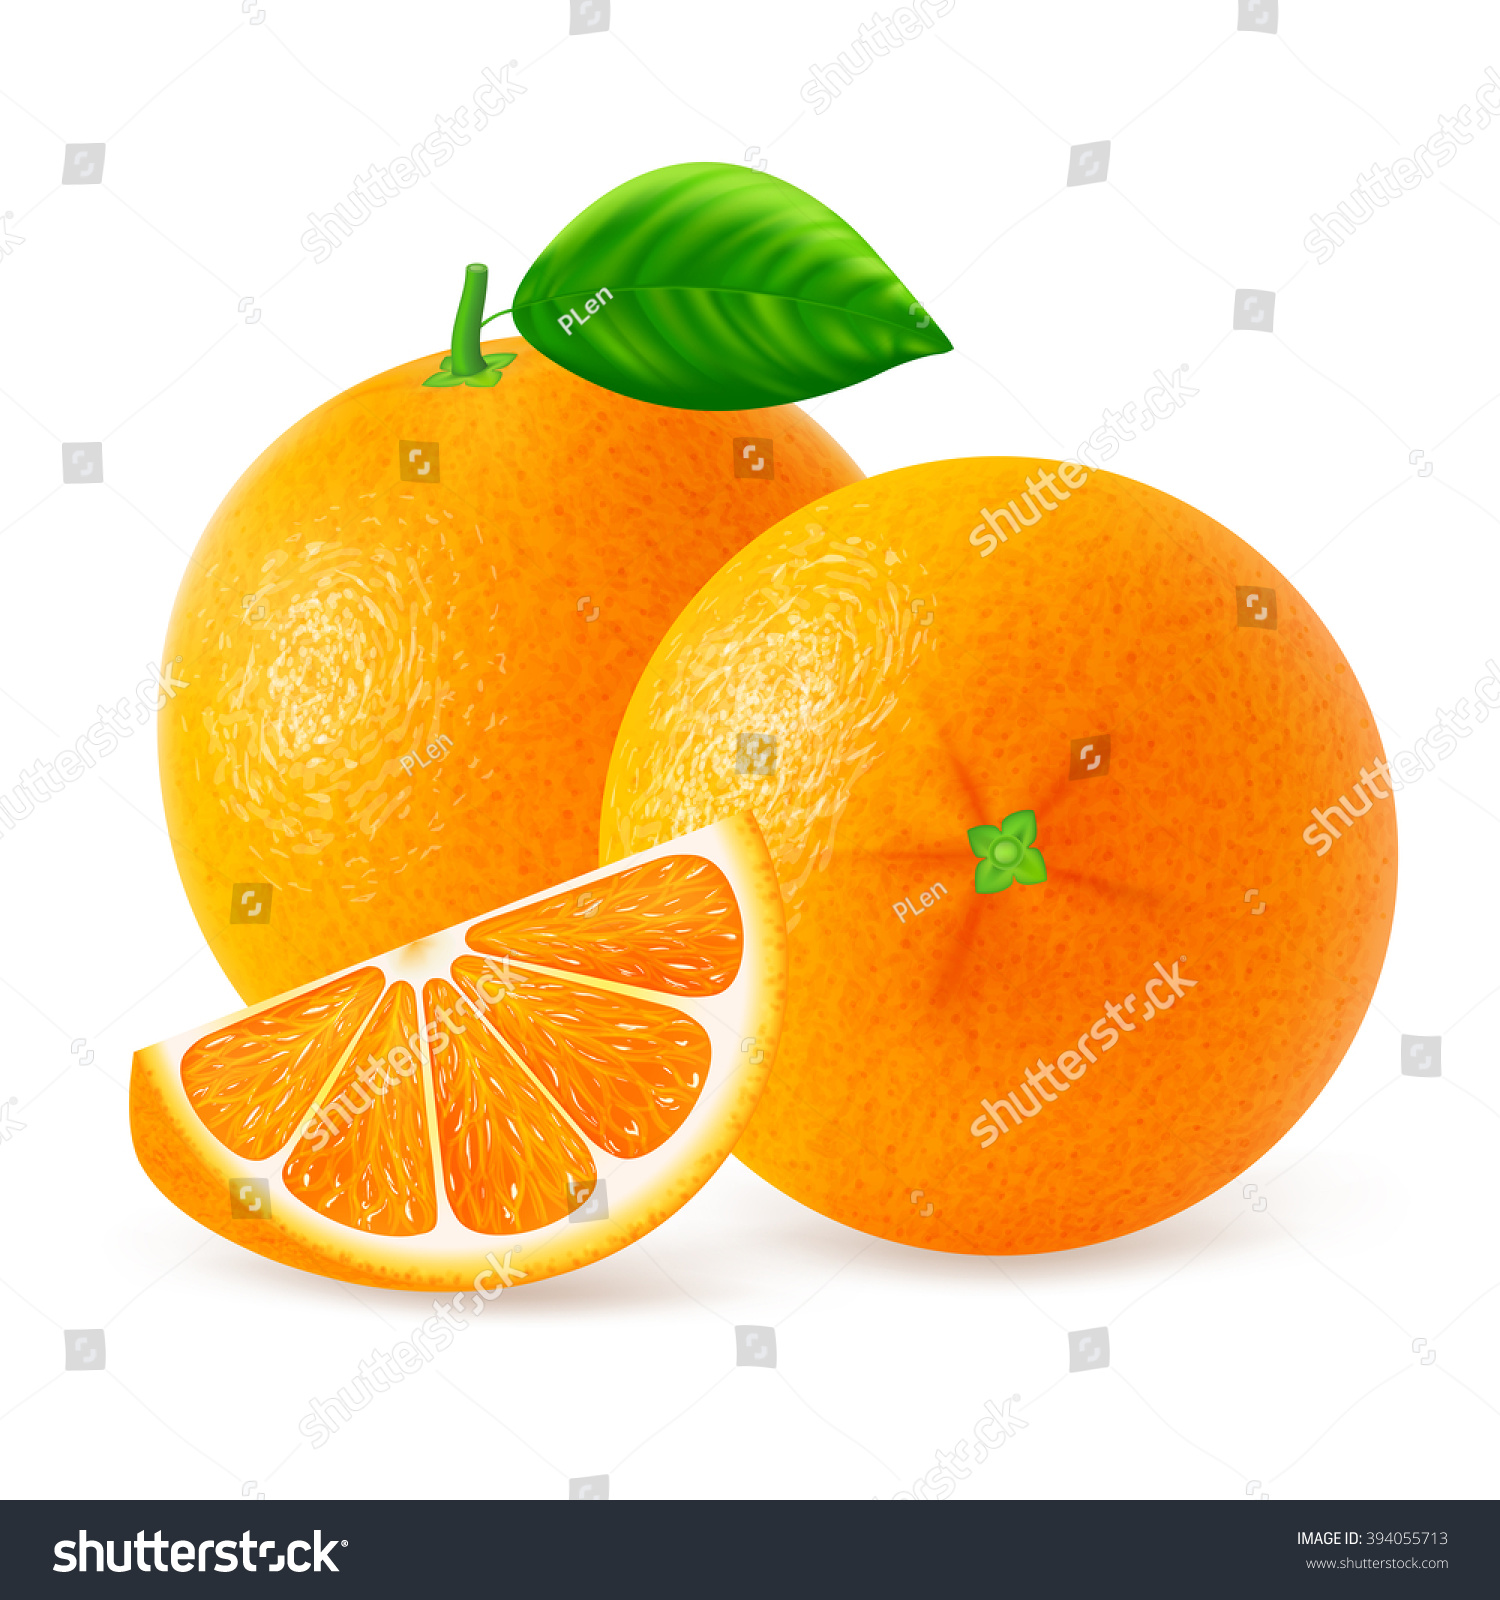 Ripe Oranges Fruits Slices Leaf Isolated Stock Vector HD (Royalty ...